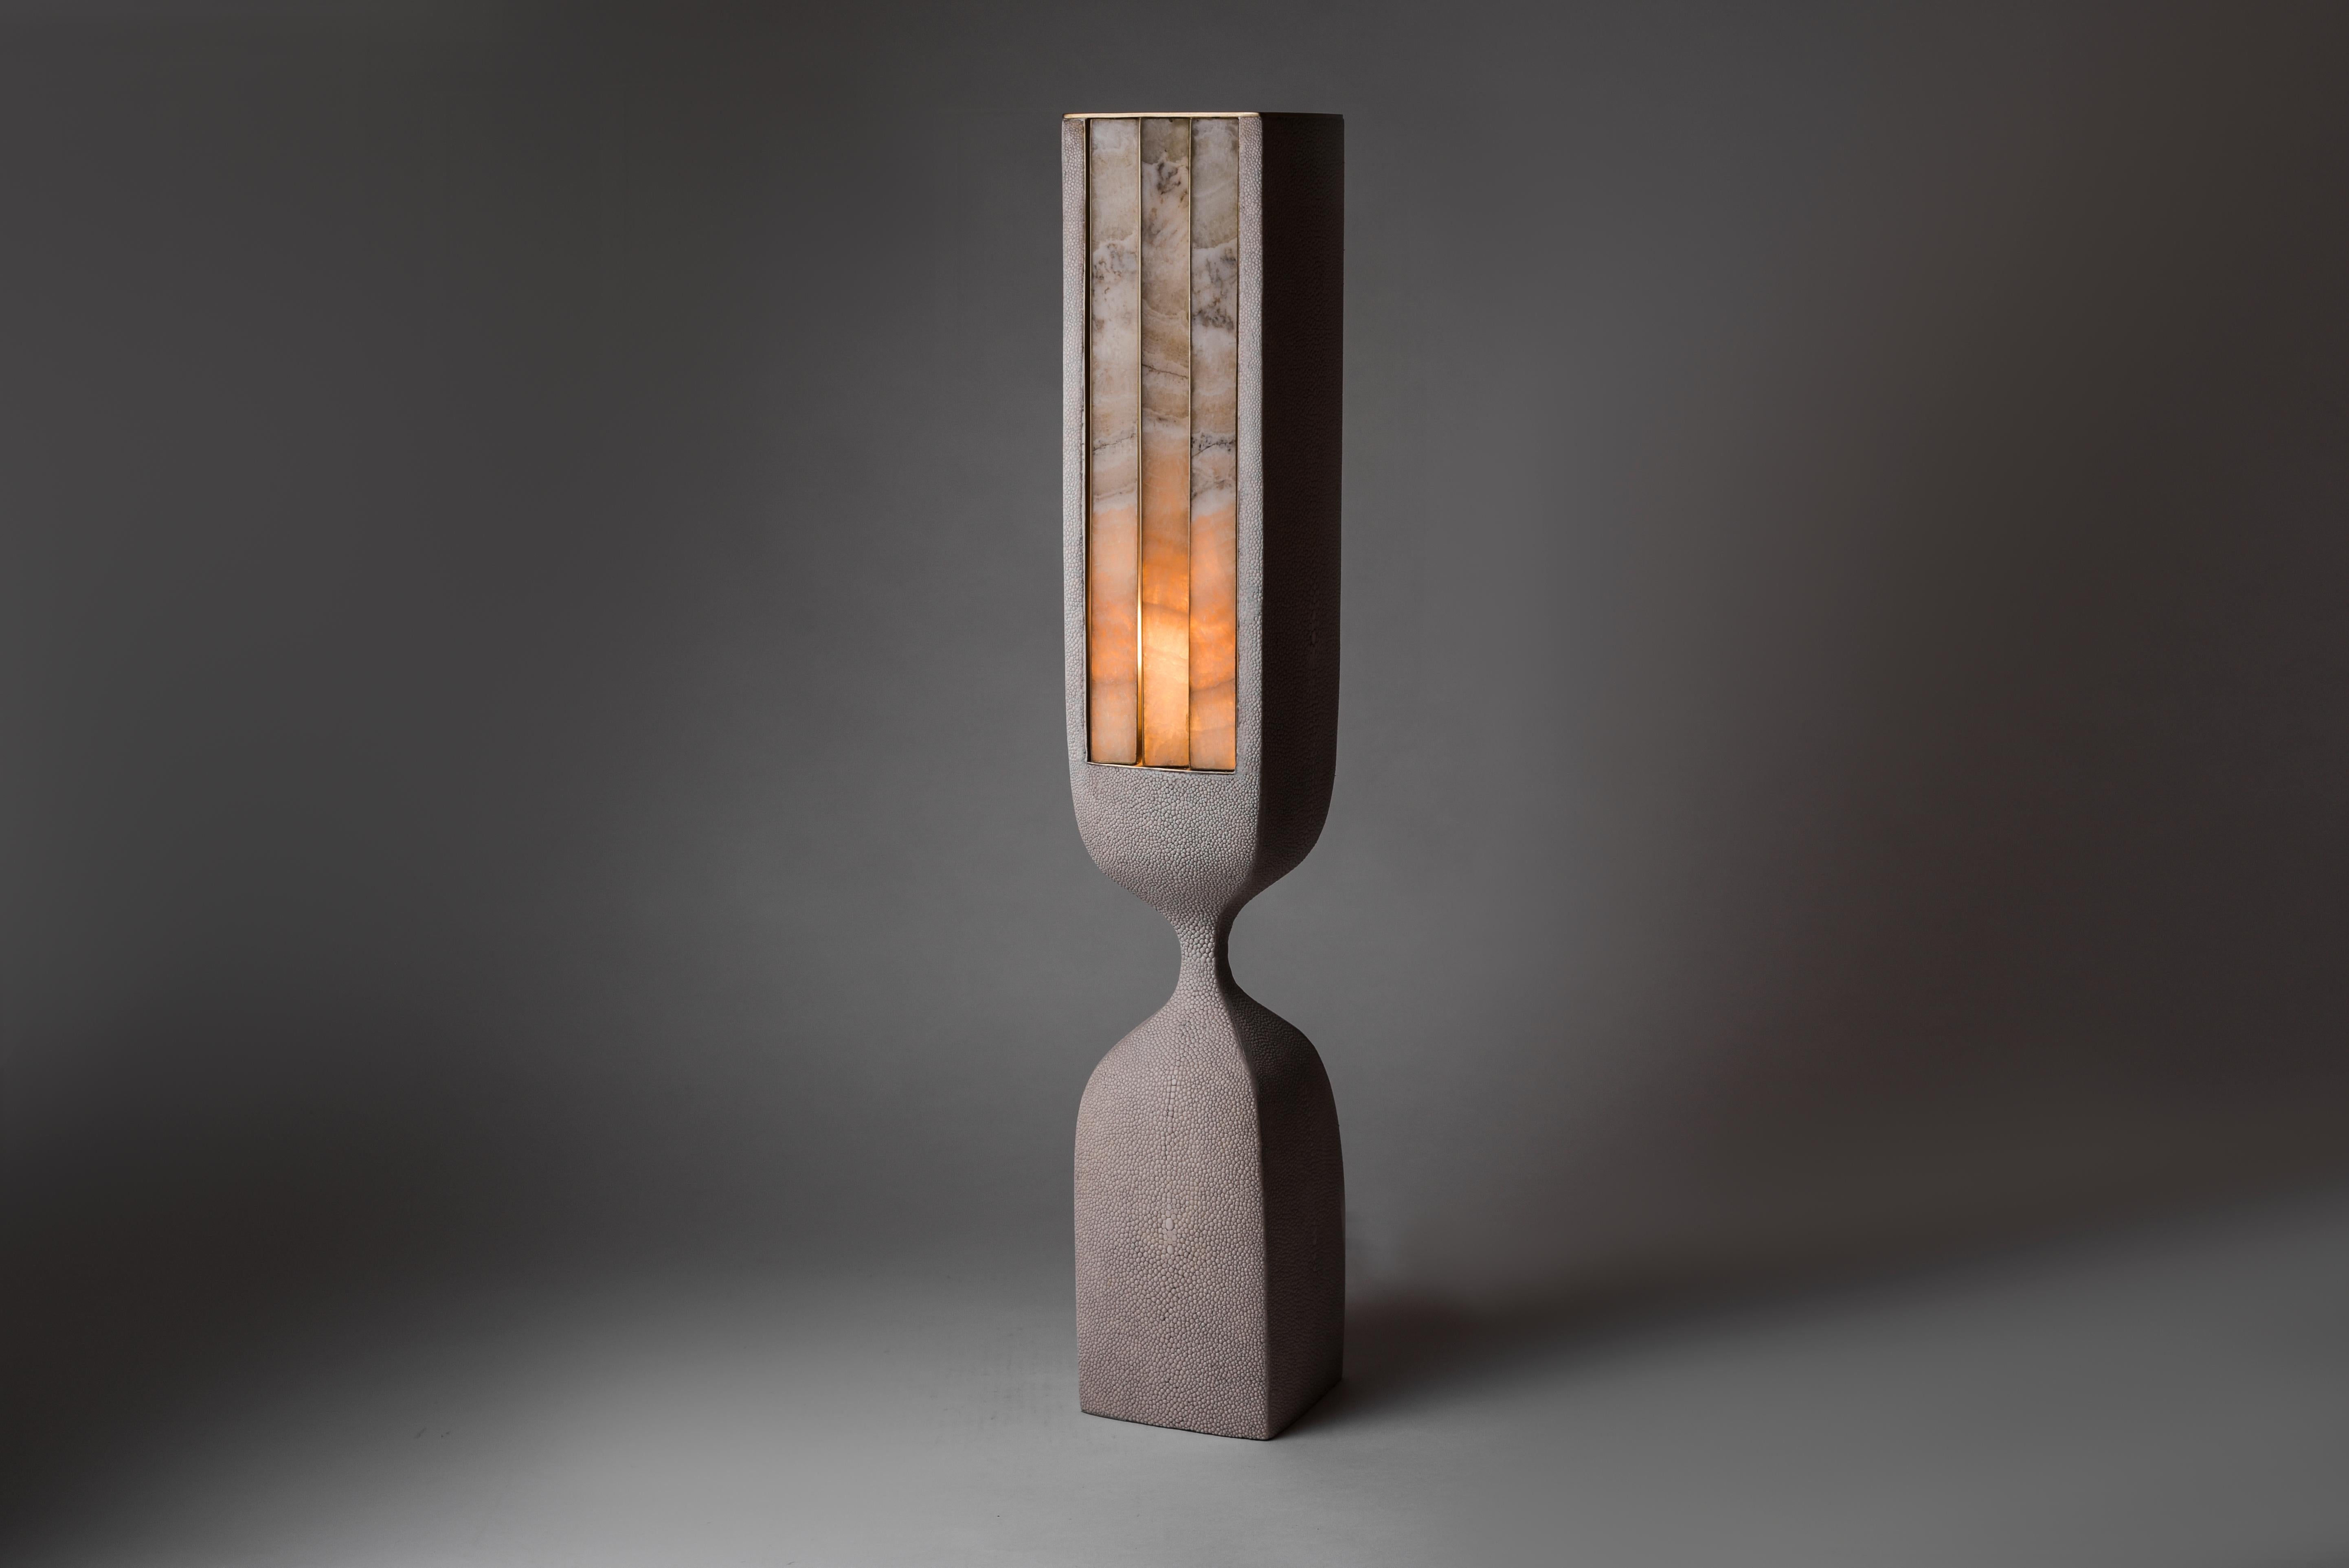 Patrick Coard Paris launches a unique and beautifully sculptural lighting collection inspired by music as a continuation of his candle line. The Rhapsody table lamp in cream shagreen is an ethereal and sculptural piece. The onyx and bronze patina